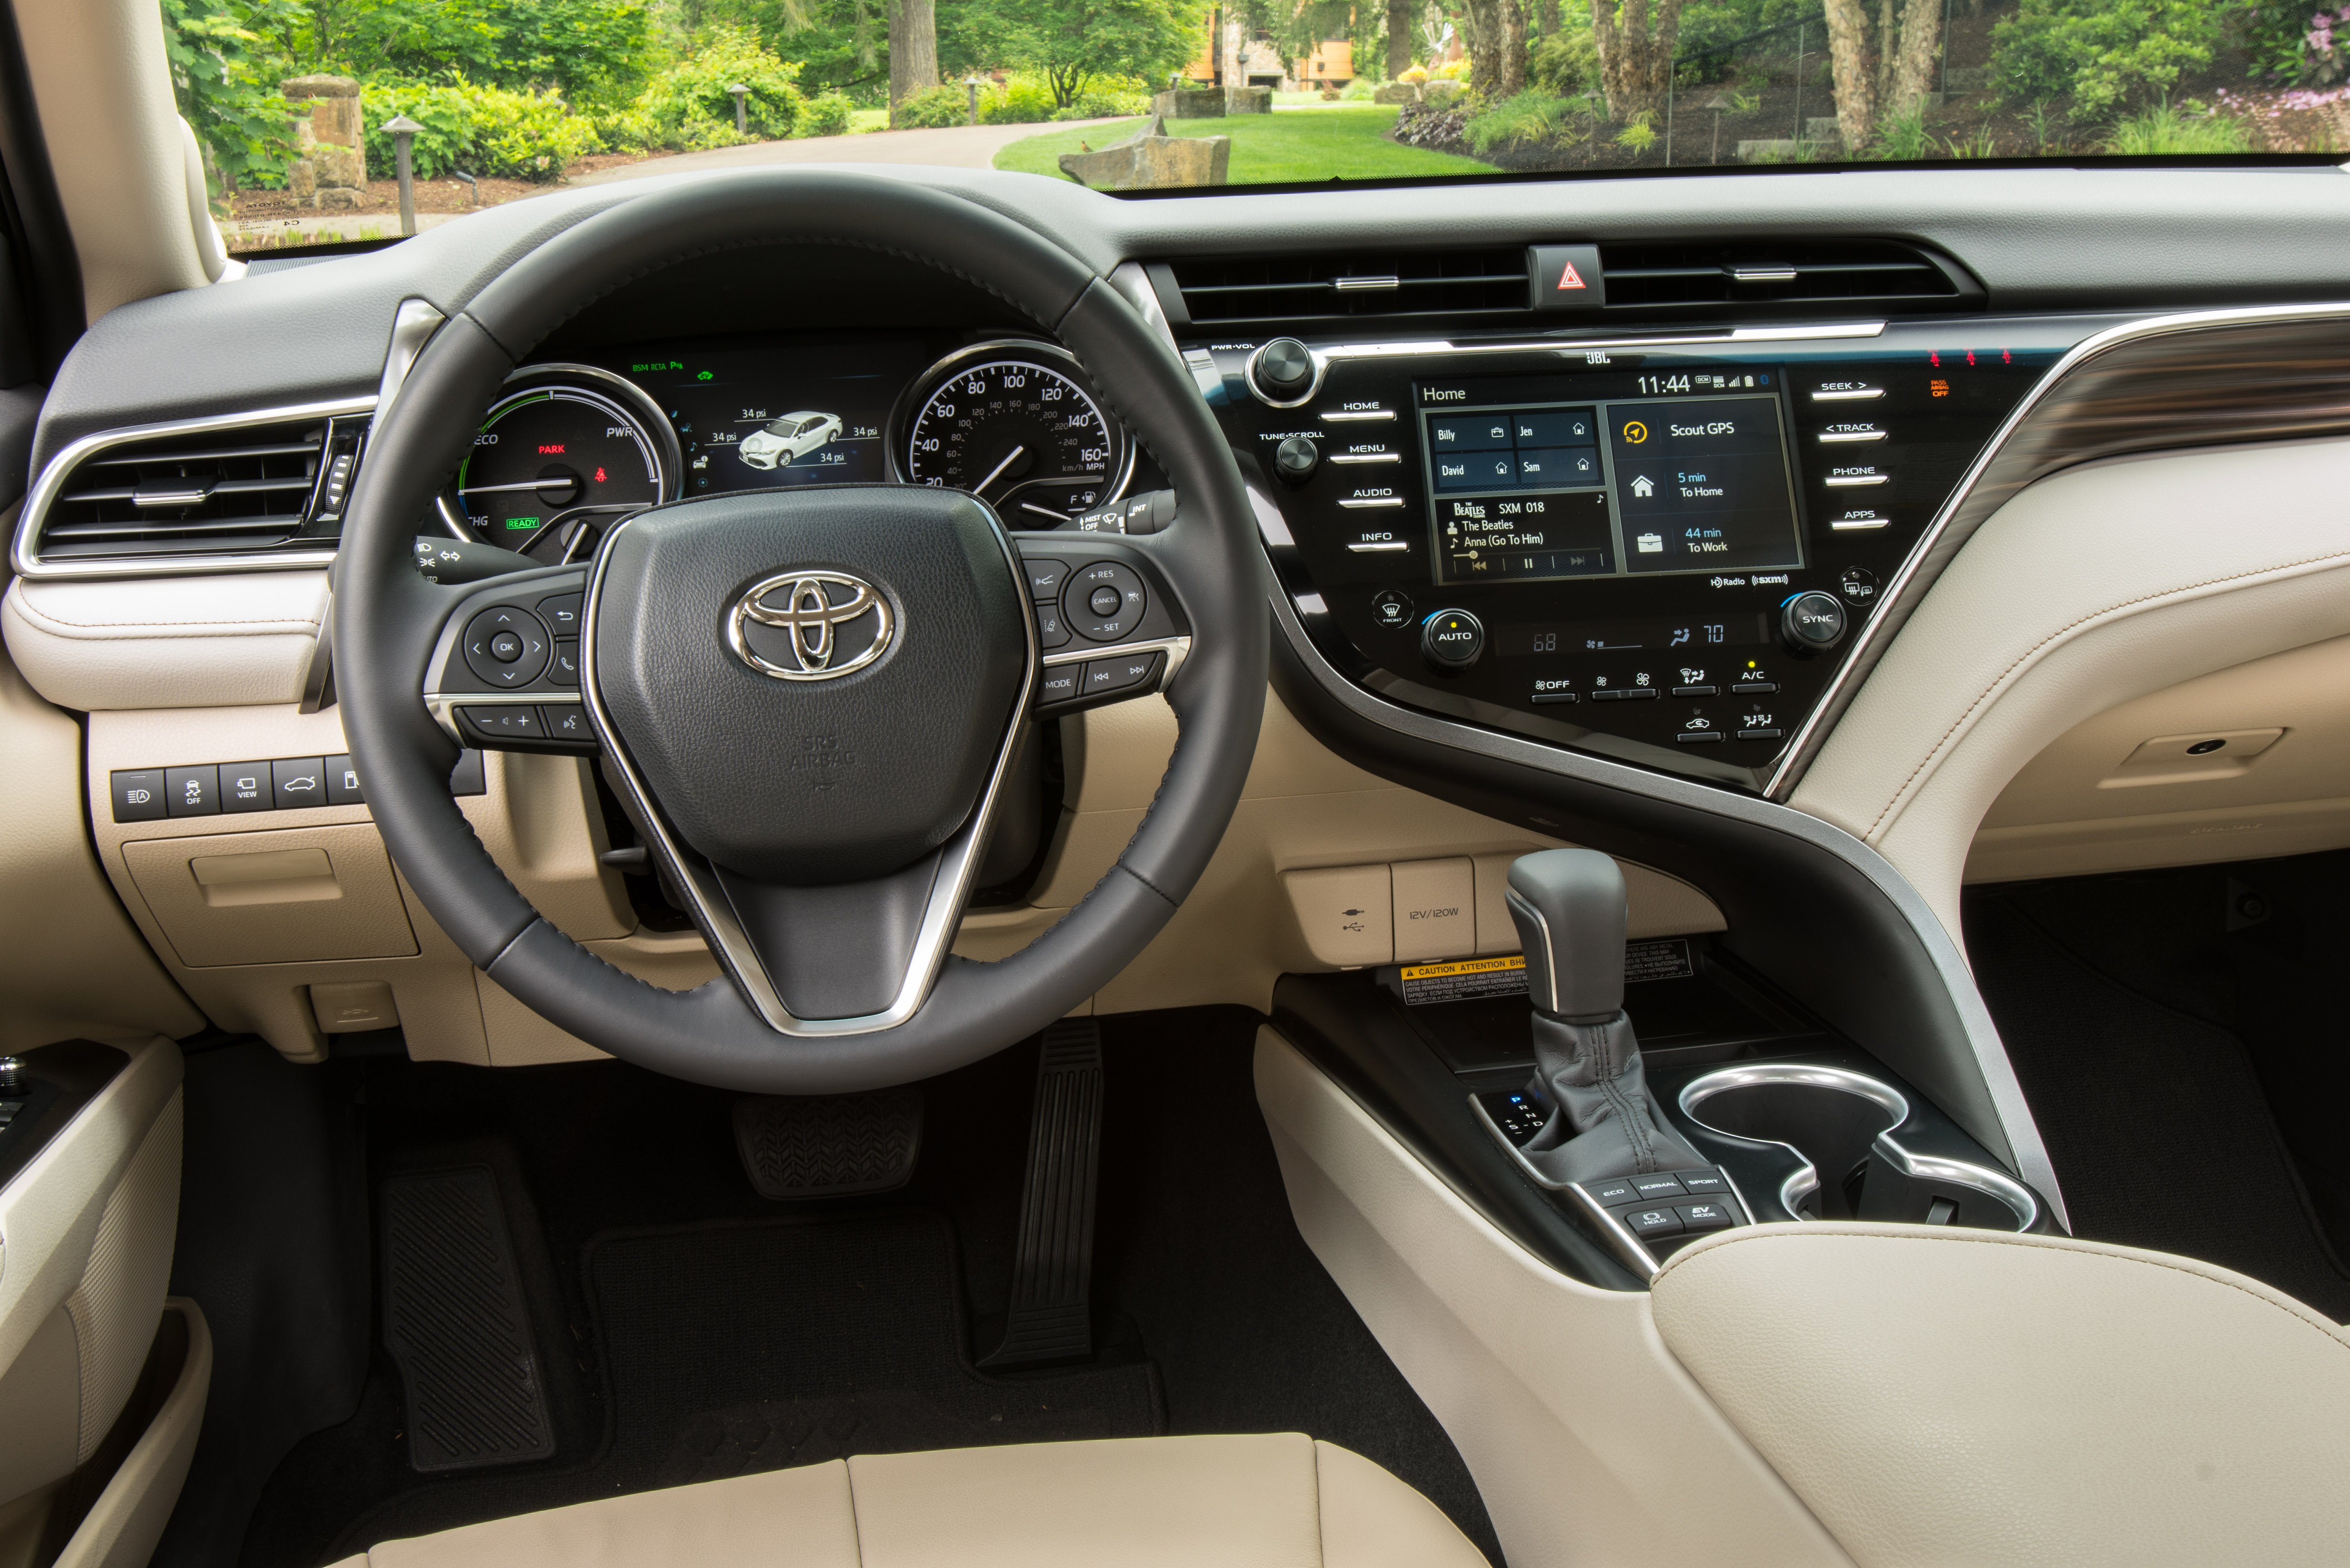 2018 Toyota Camry Hybrid review | CarAdvice